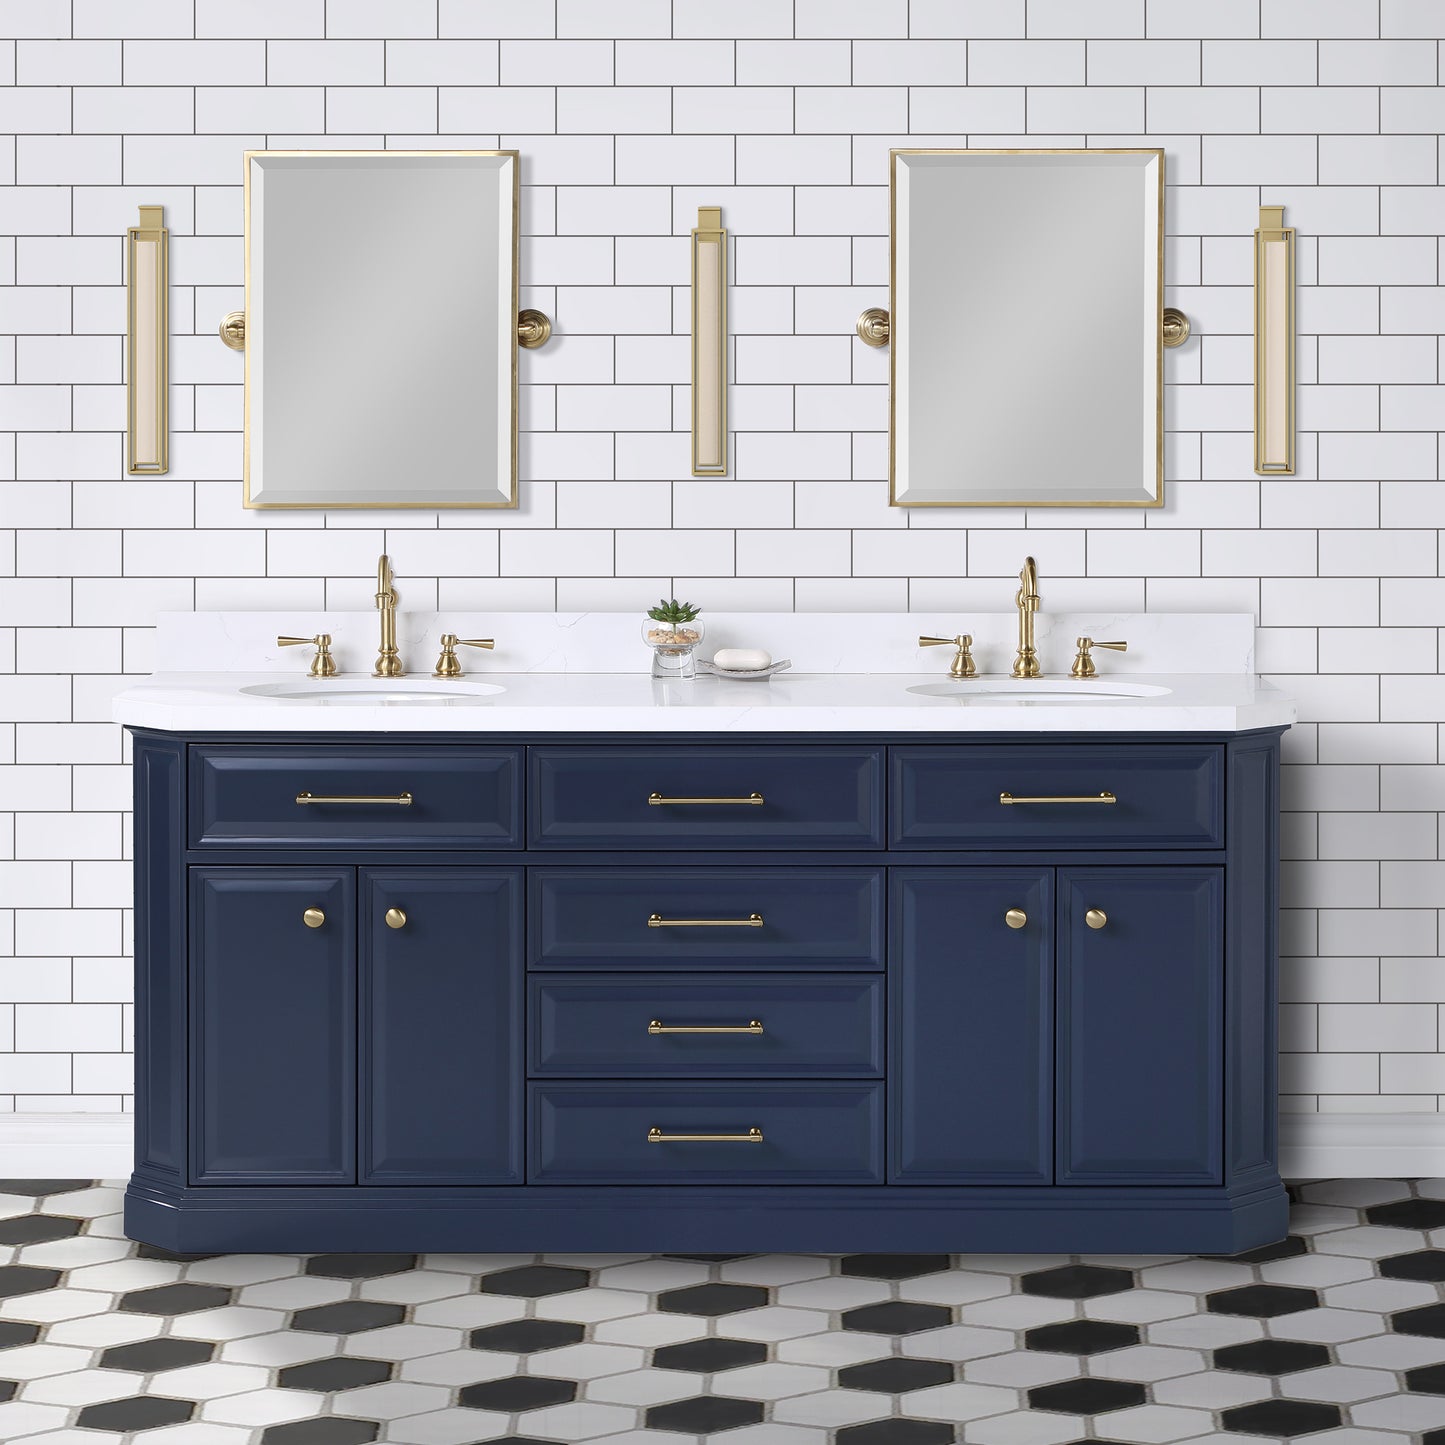 Water Creation Palace 72" Inch Double Sink White Quartz Countertop Vanity in Monarch Blue with Hook Faucets - Luxe Bathroom Vanities